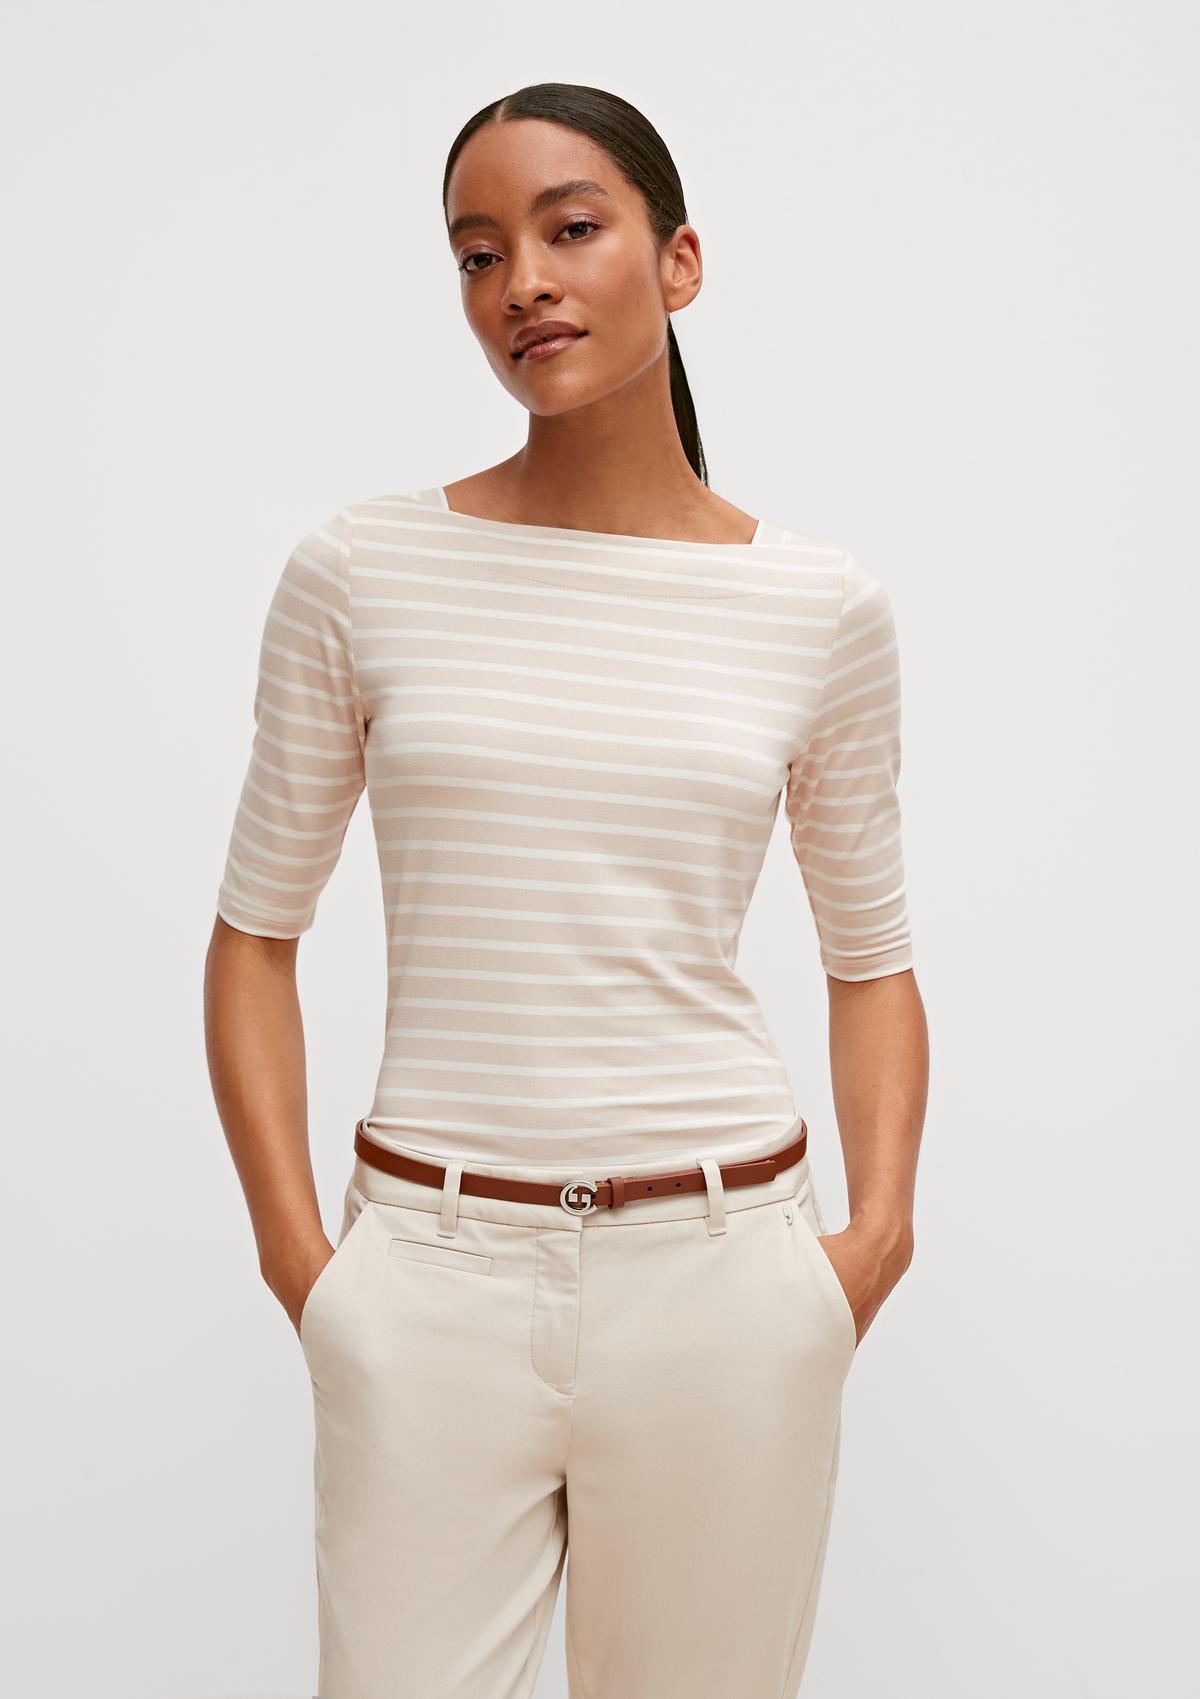 Striped top with mid-length sleeves